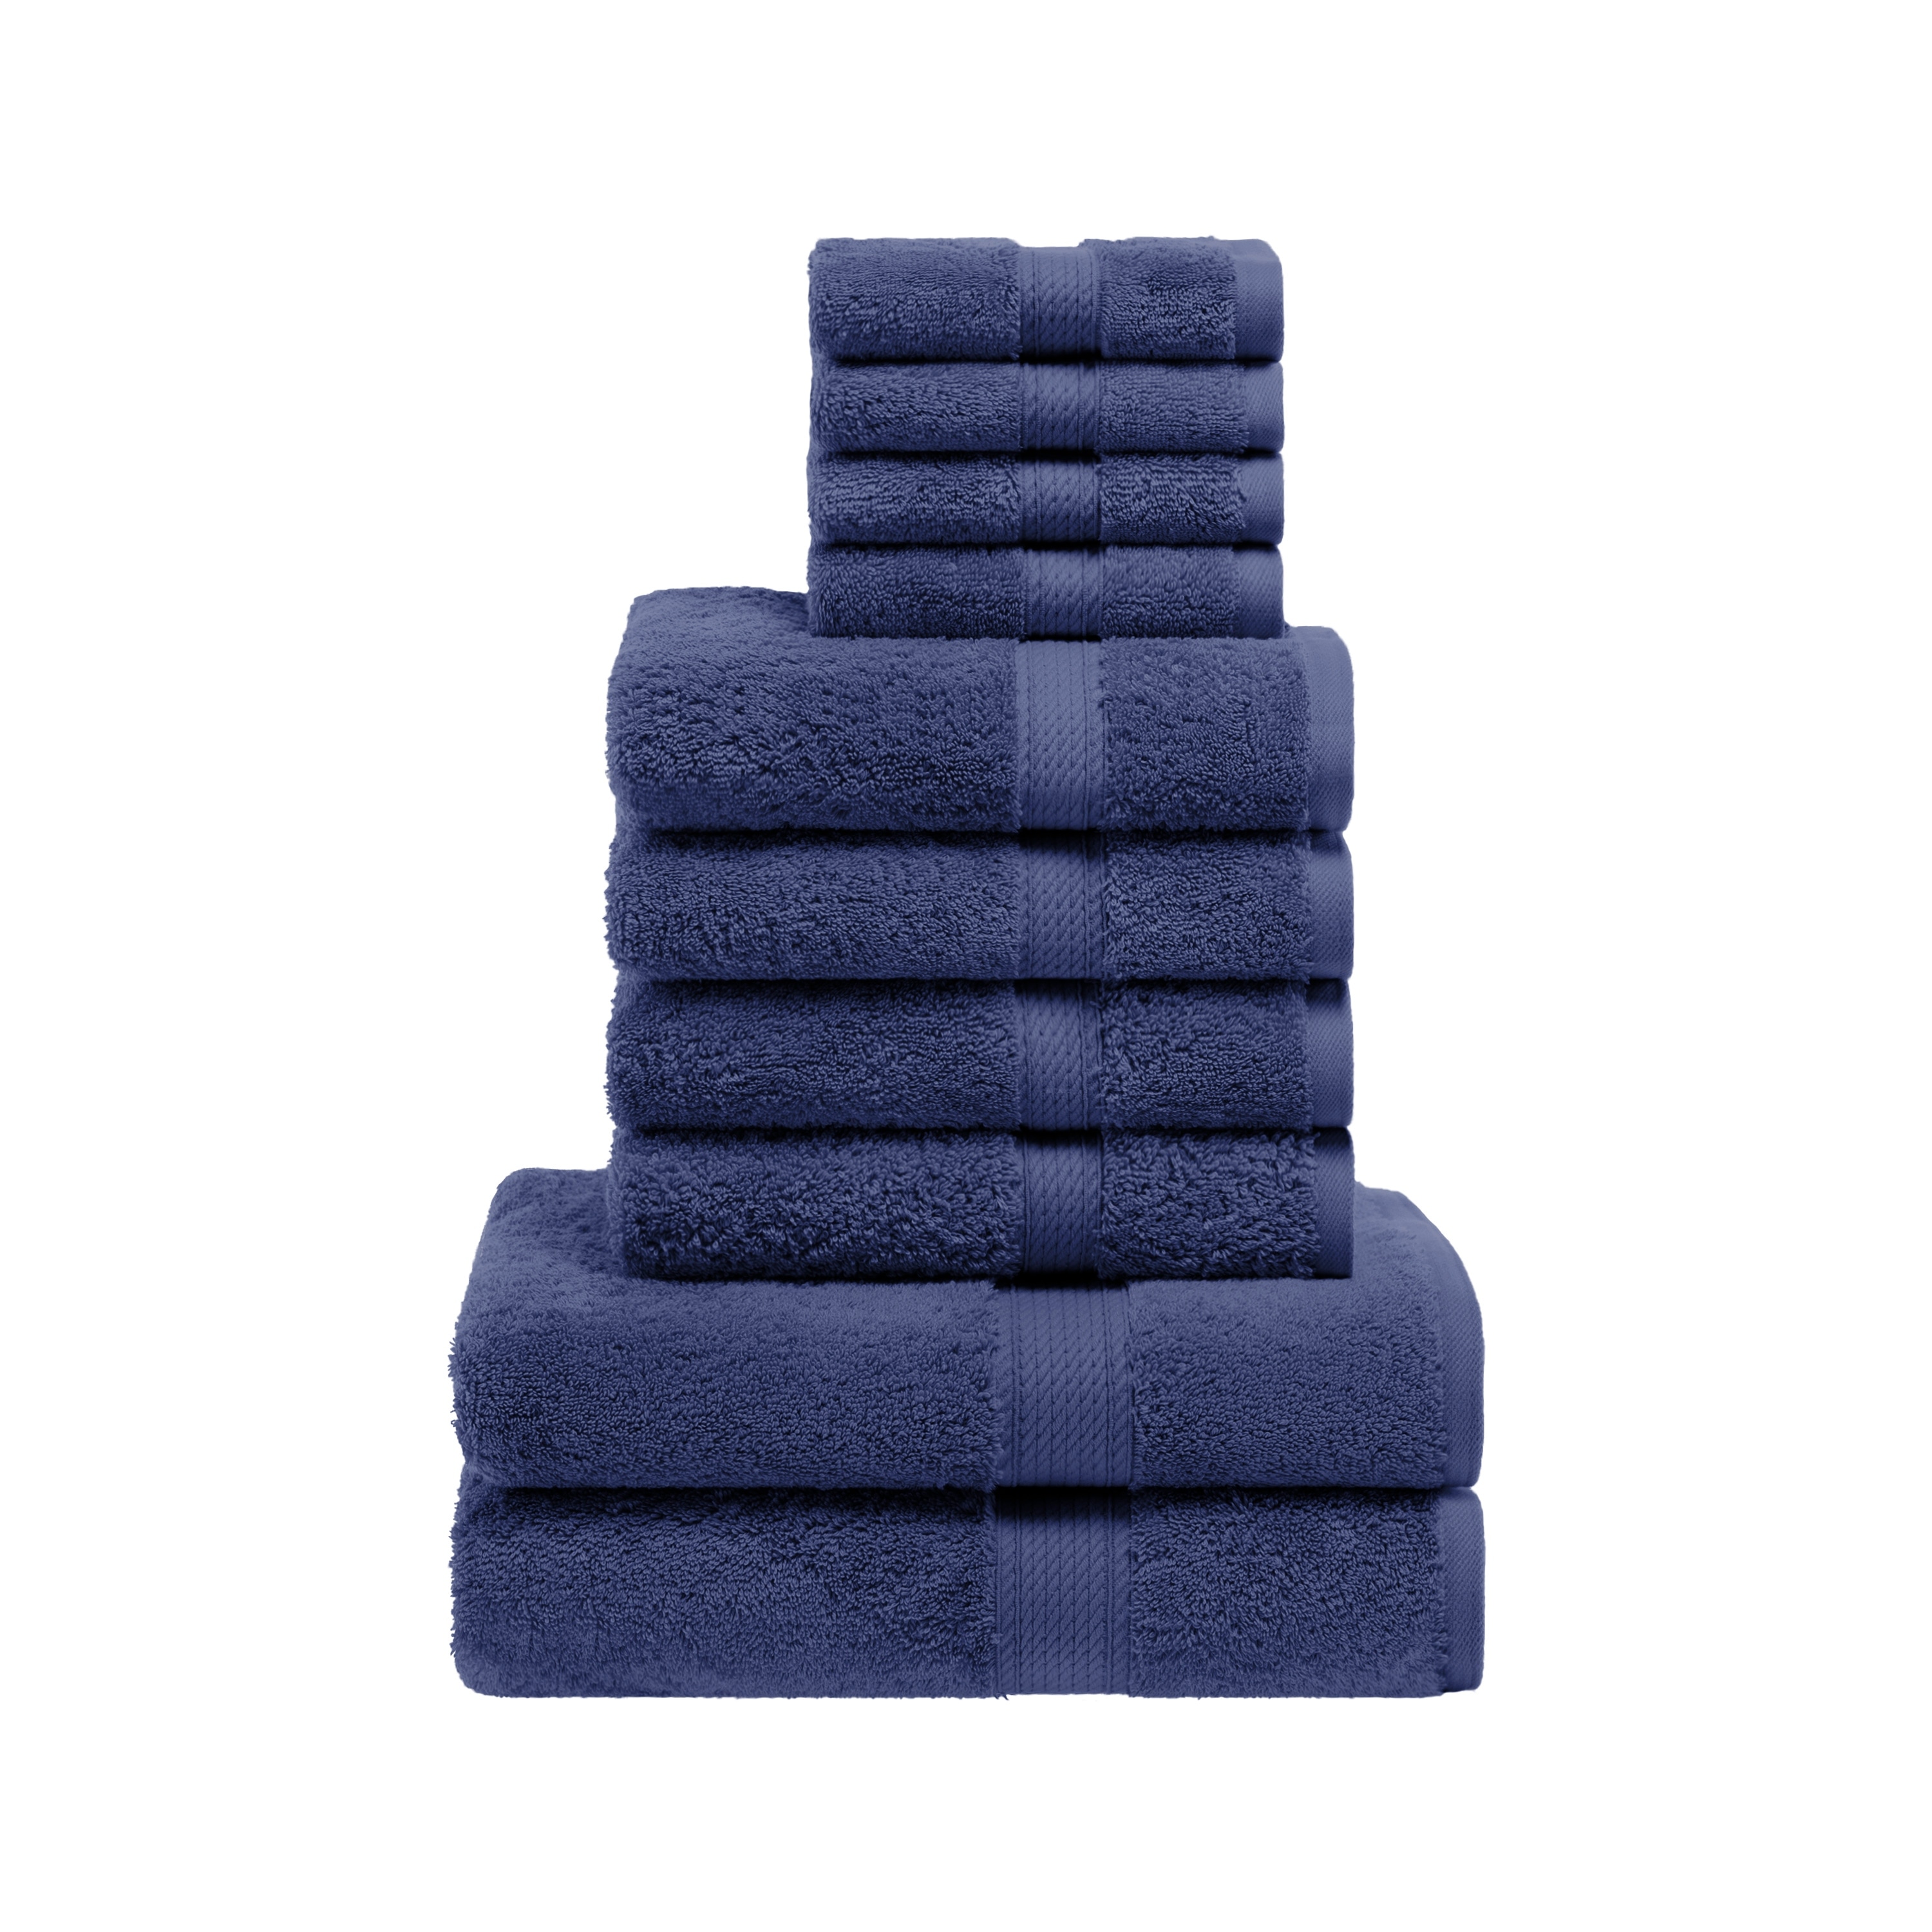 https://ak1.ostkcdn.com/images/products/is/images/direct/110ee02179581c61ebf7fe955e04806ae5f09d6b/Egyptian-Cotton-Heavyweight-Solid-Plush-Towel-Set-by-Superior.jpg